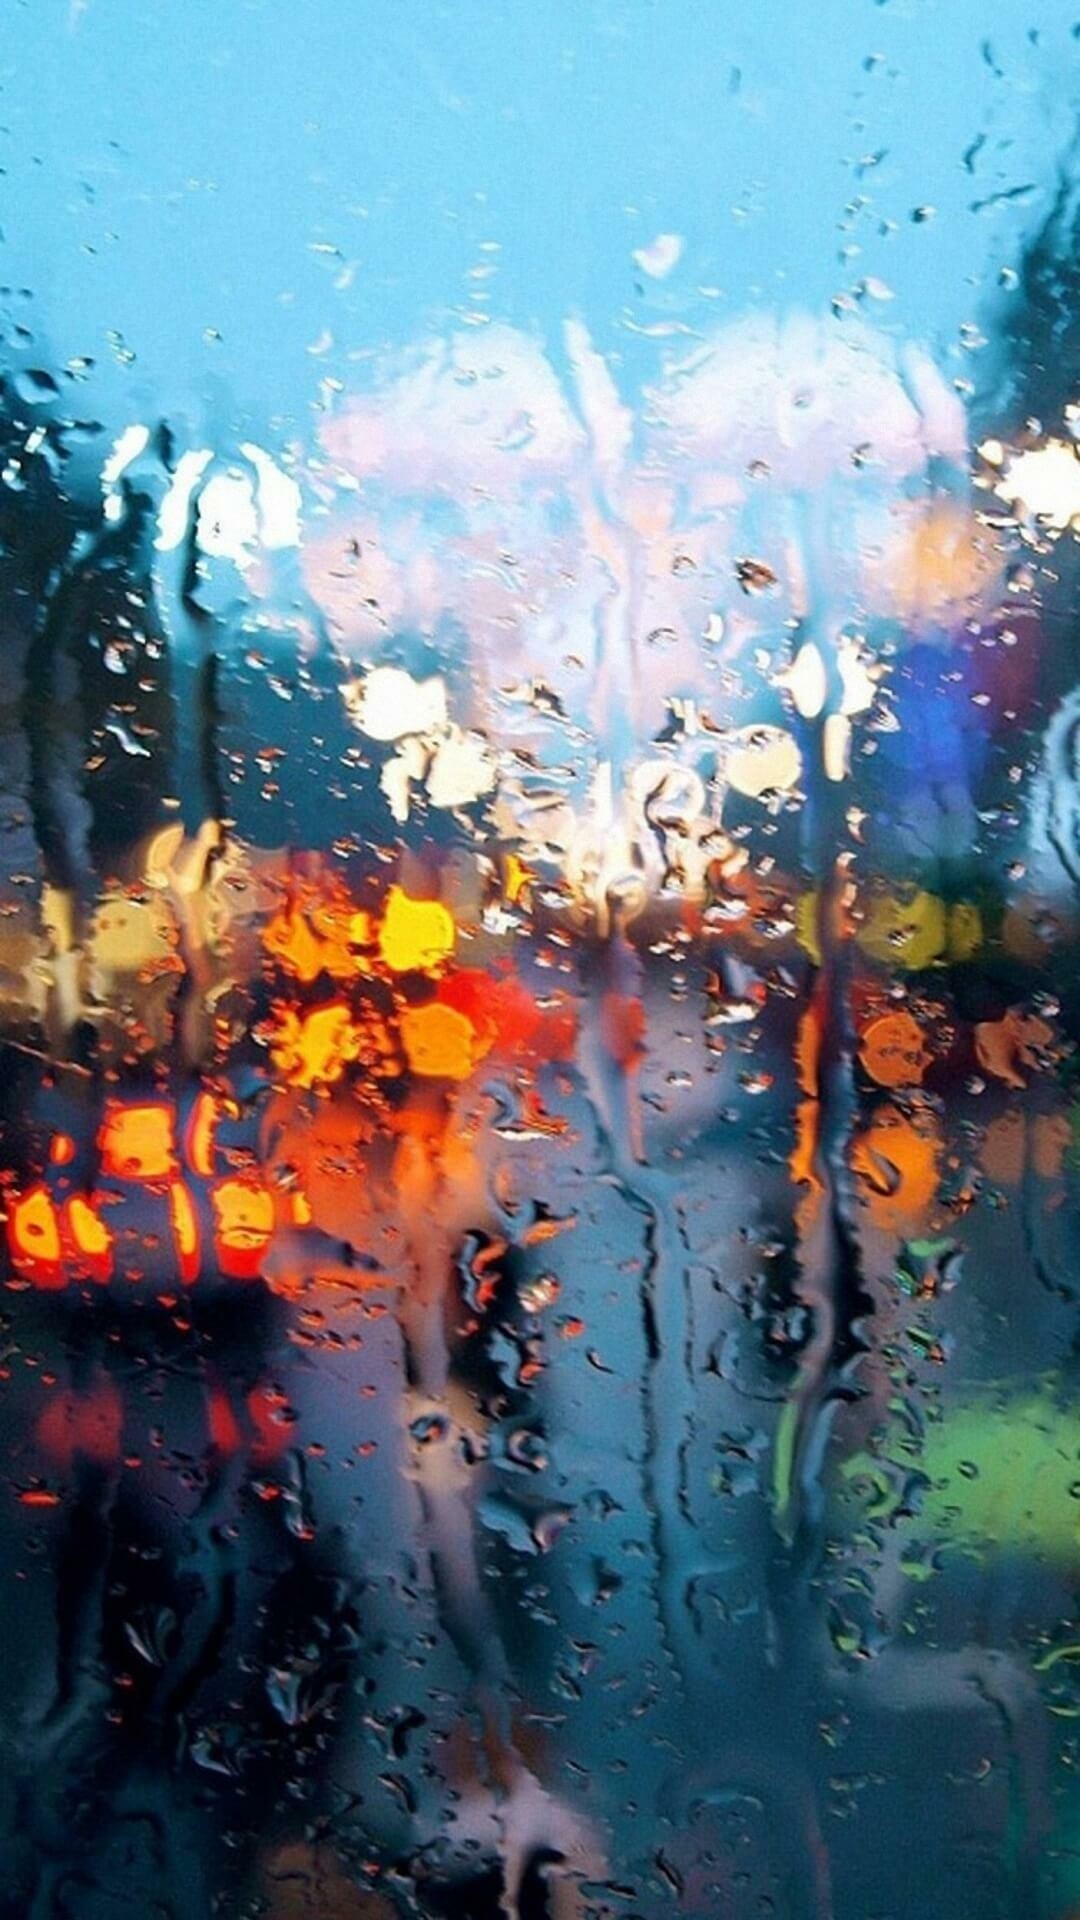 Rain: A major component of the Earth's water cycle, Blur. 1080x1920 Full HD Wallpaper.